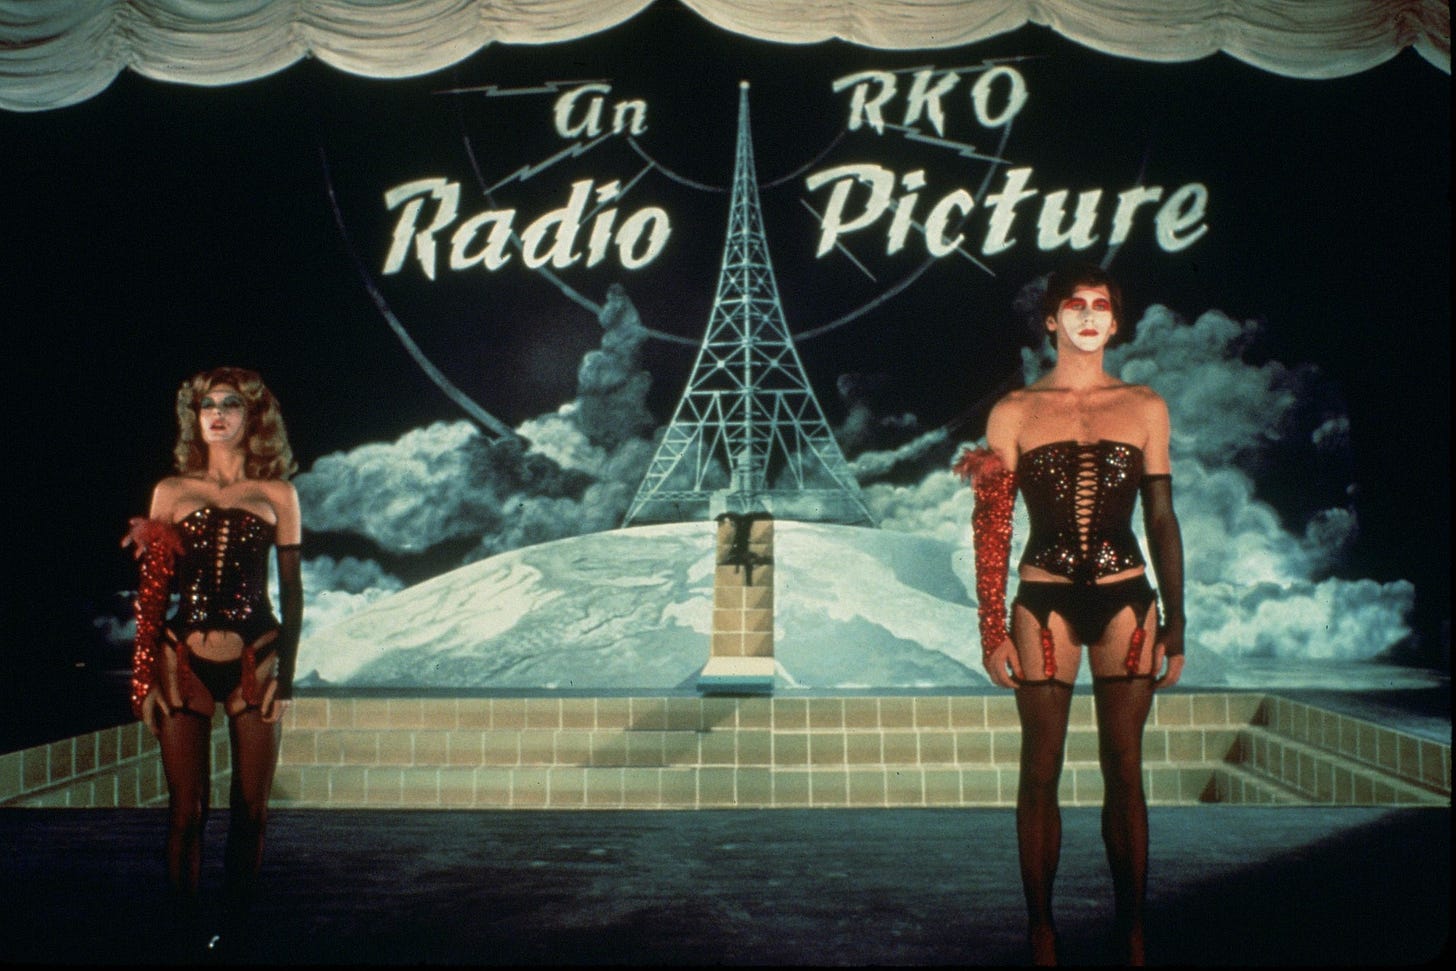 Brad and Janet stand in corsets and garters with makeup in front of an RKO Radio Picture sign